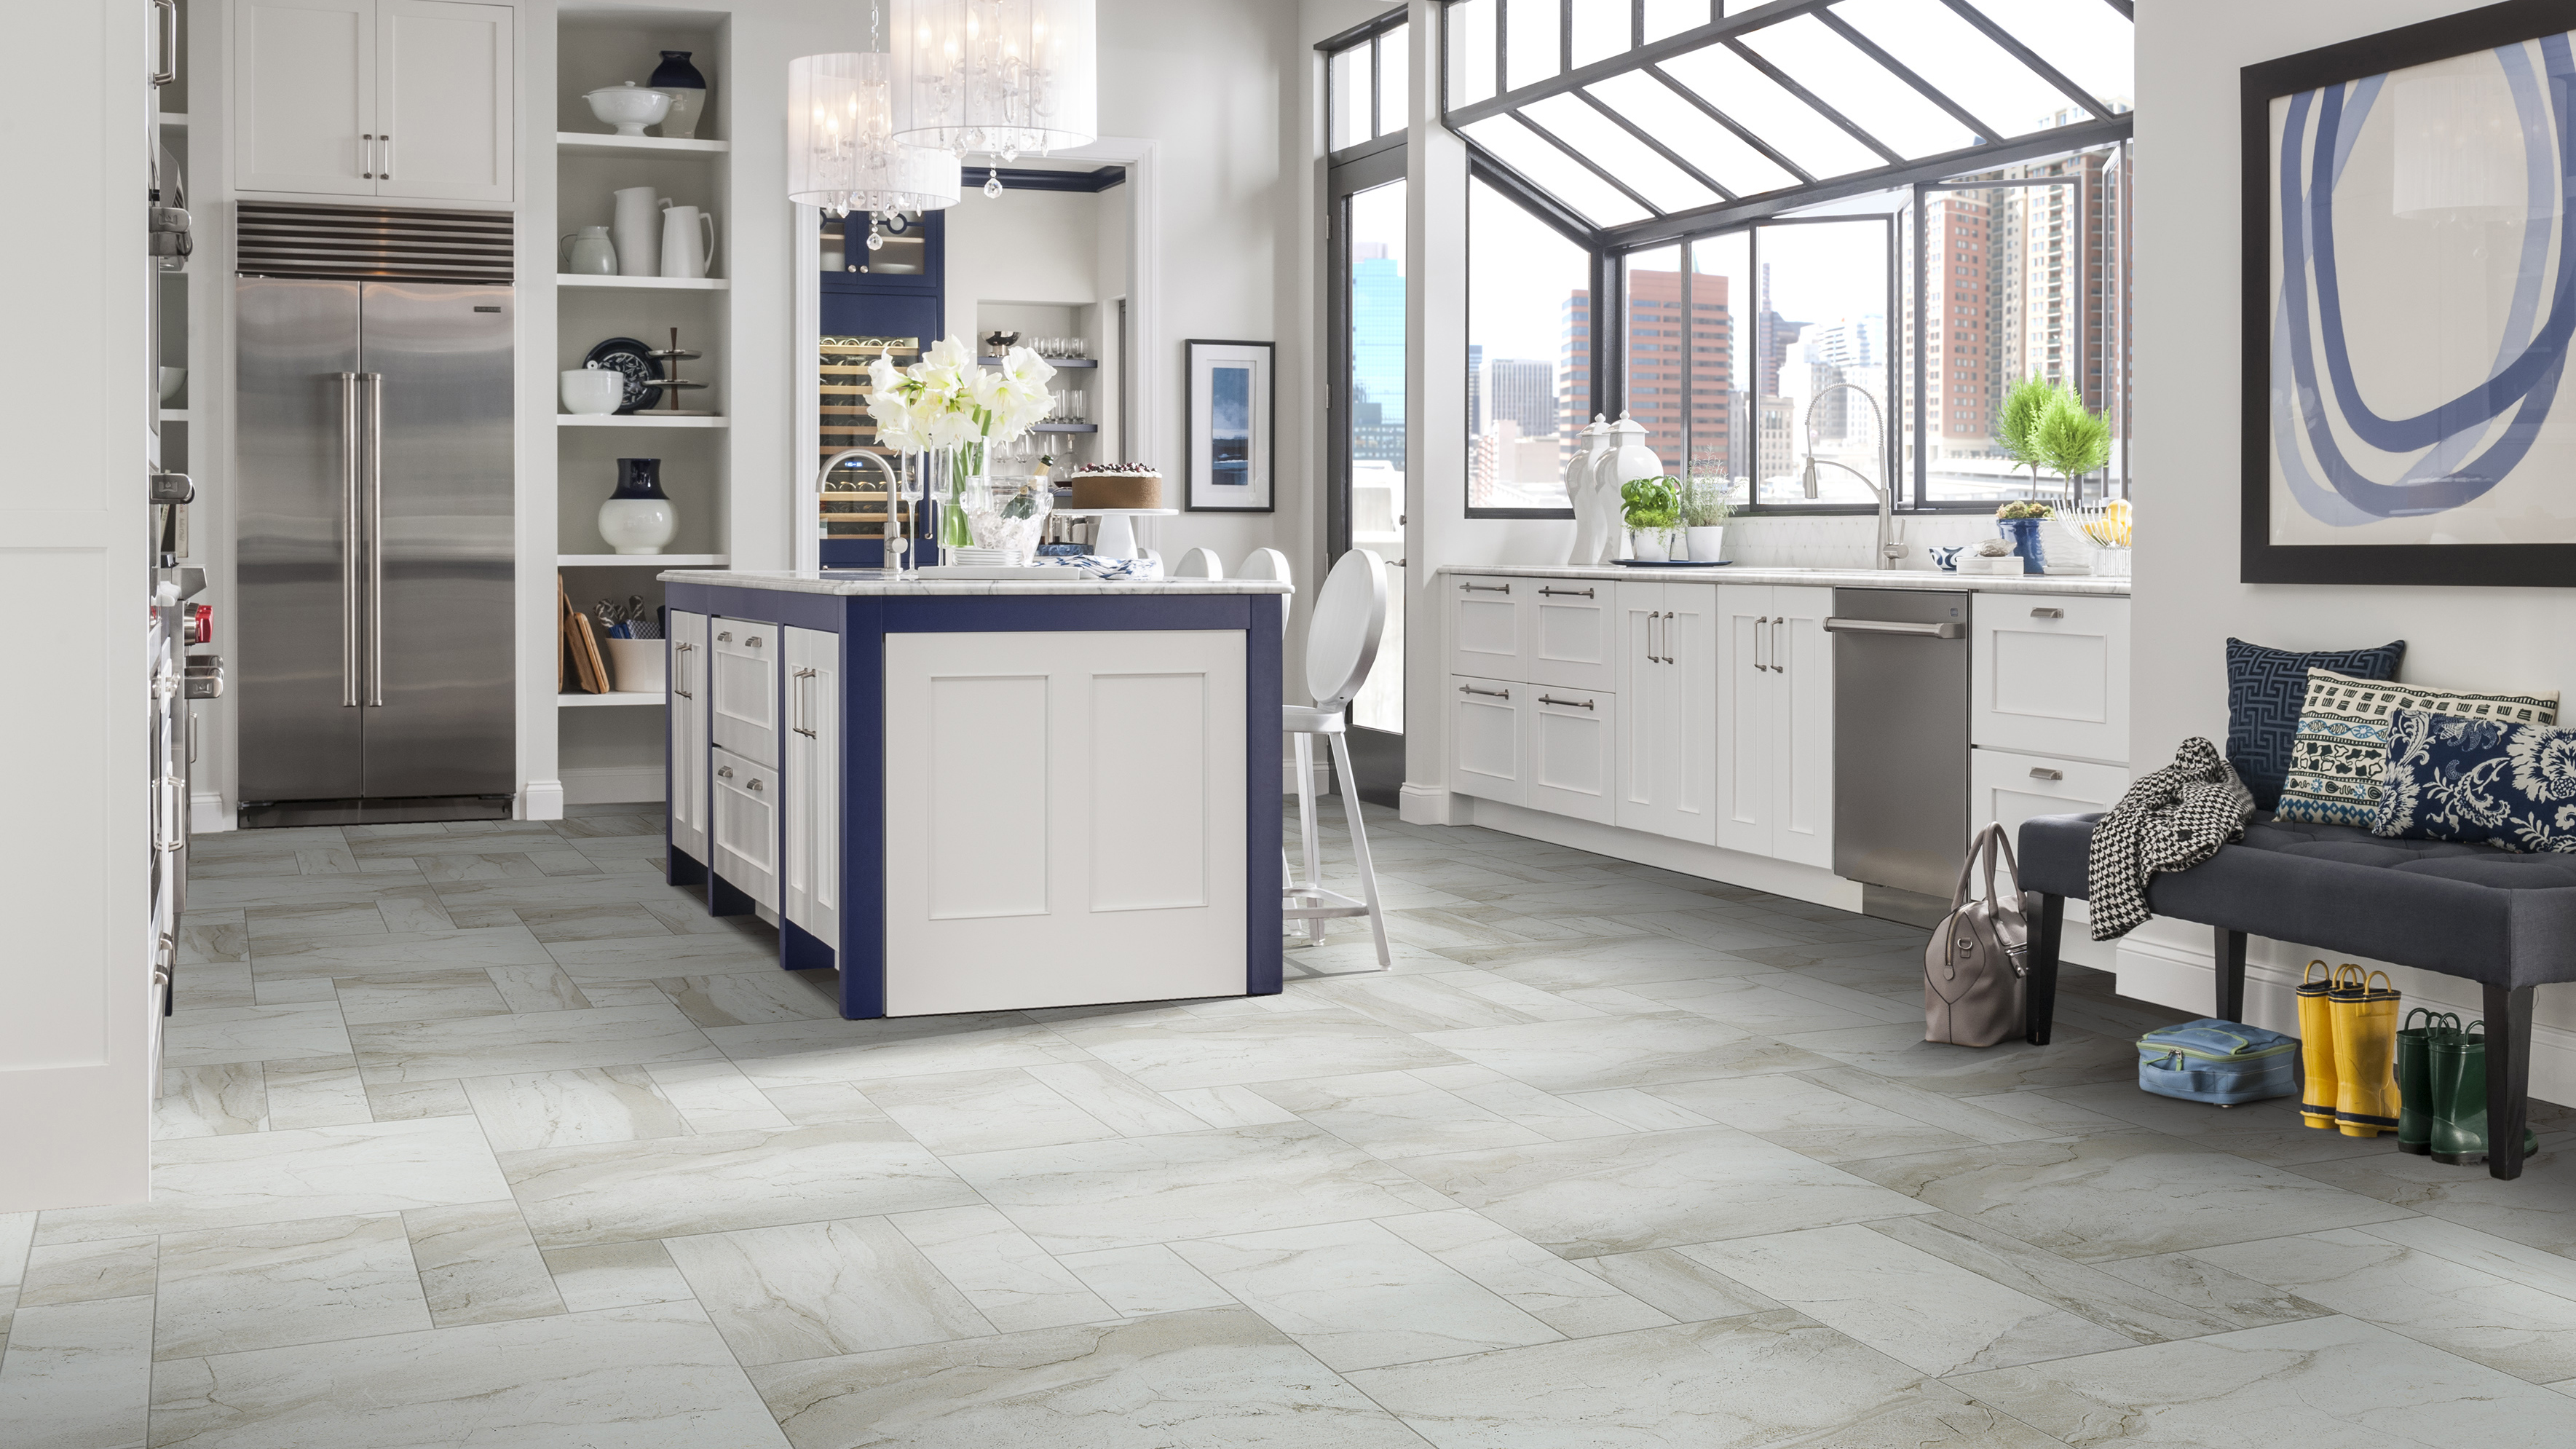 Tile floors in a kitchen.